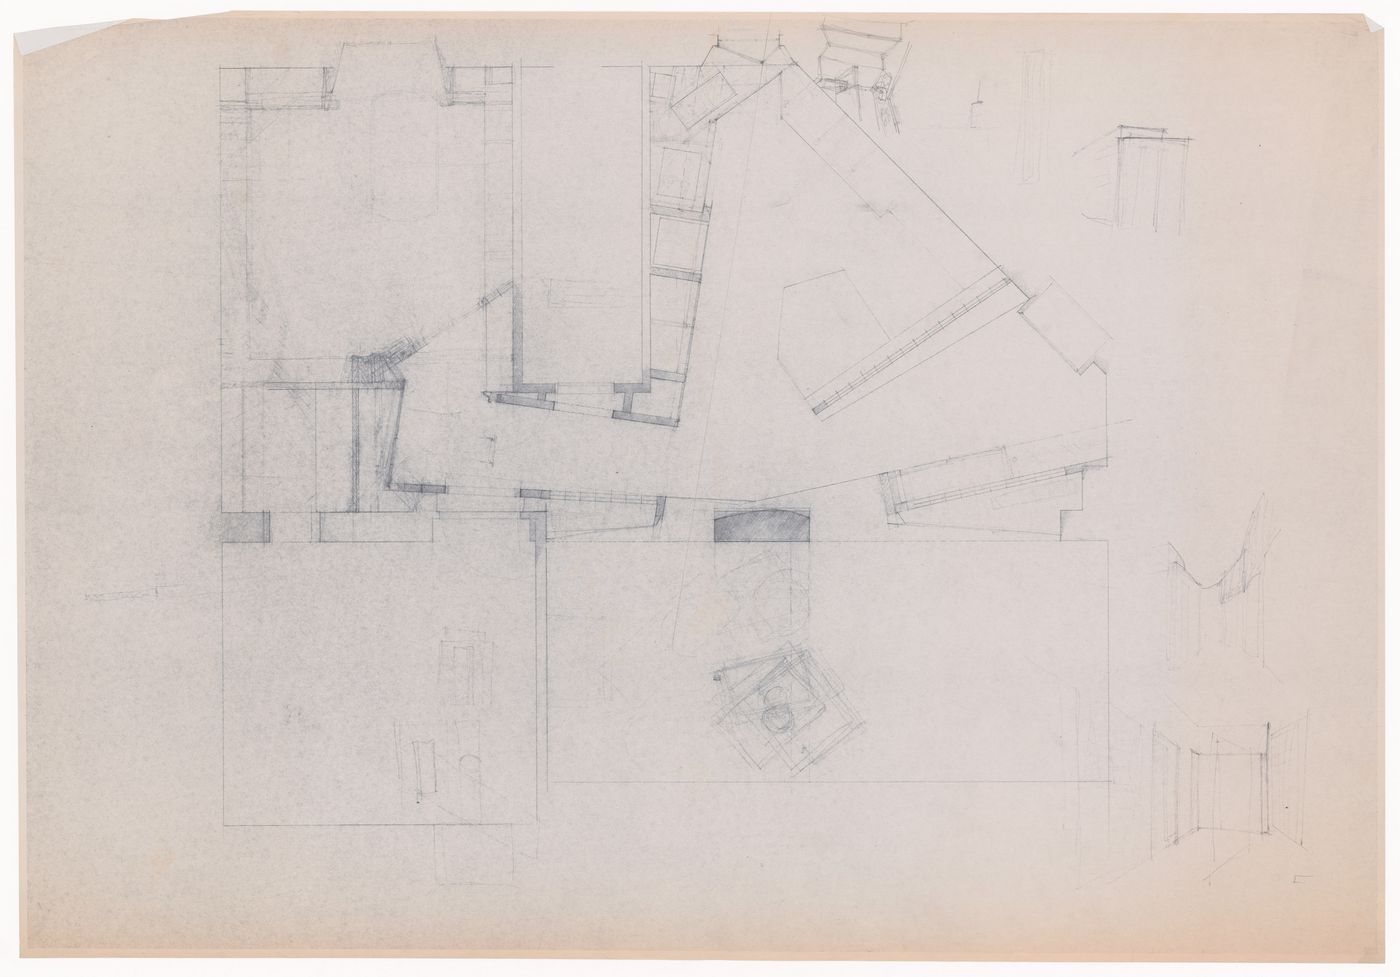 Plans and sketches for Casa De Paolini, Milan, Italy